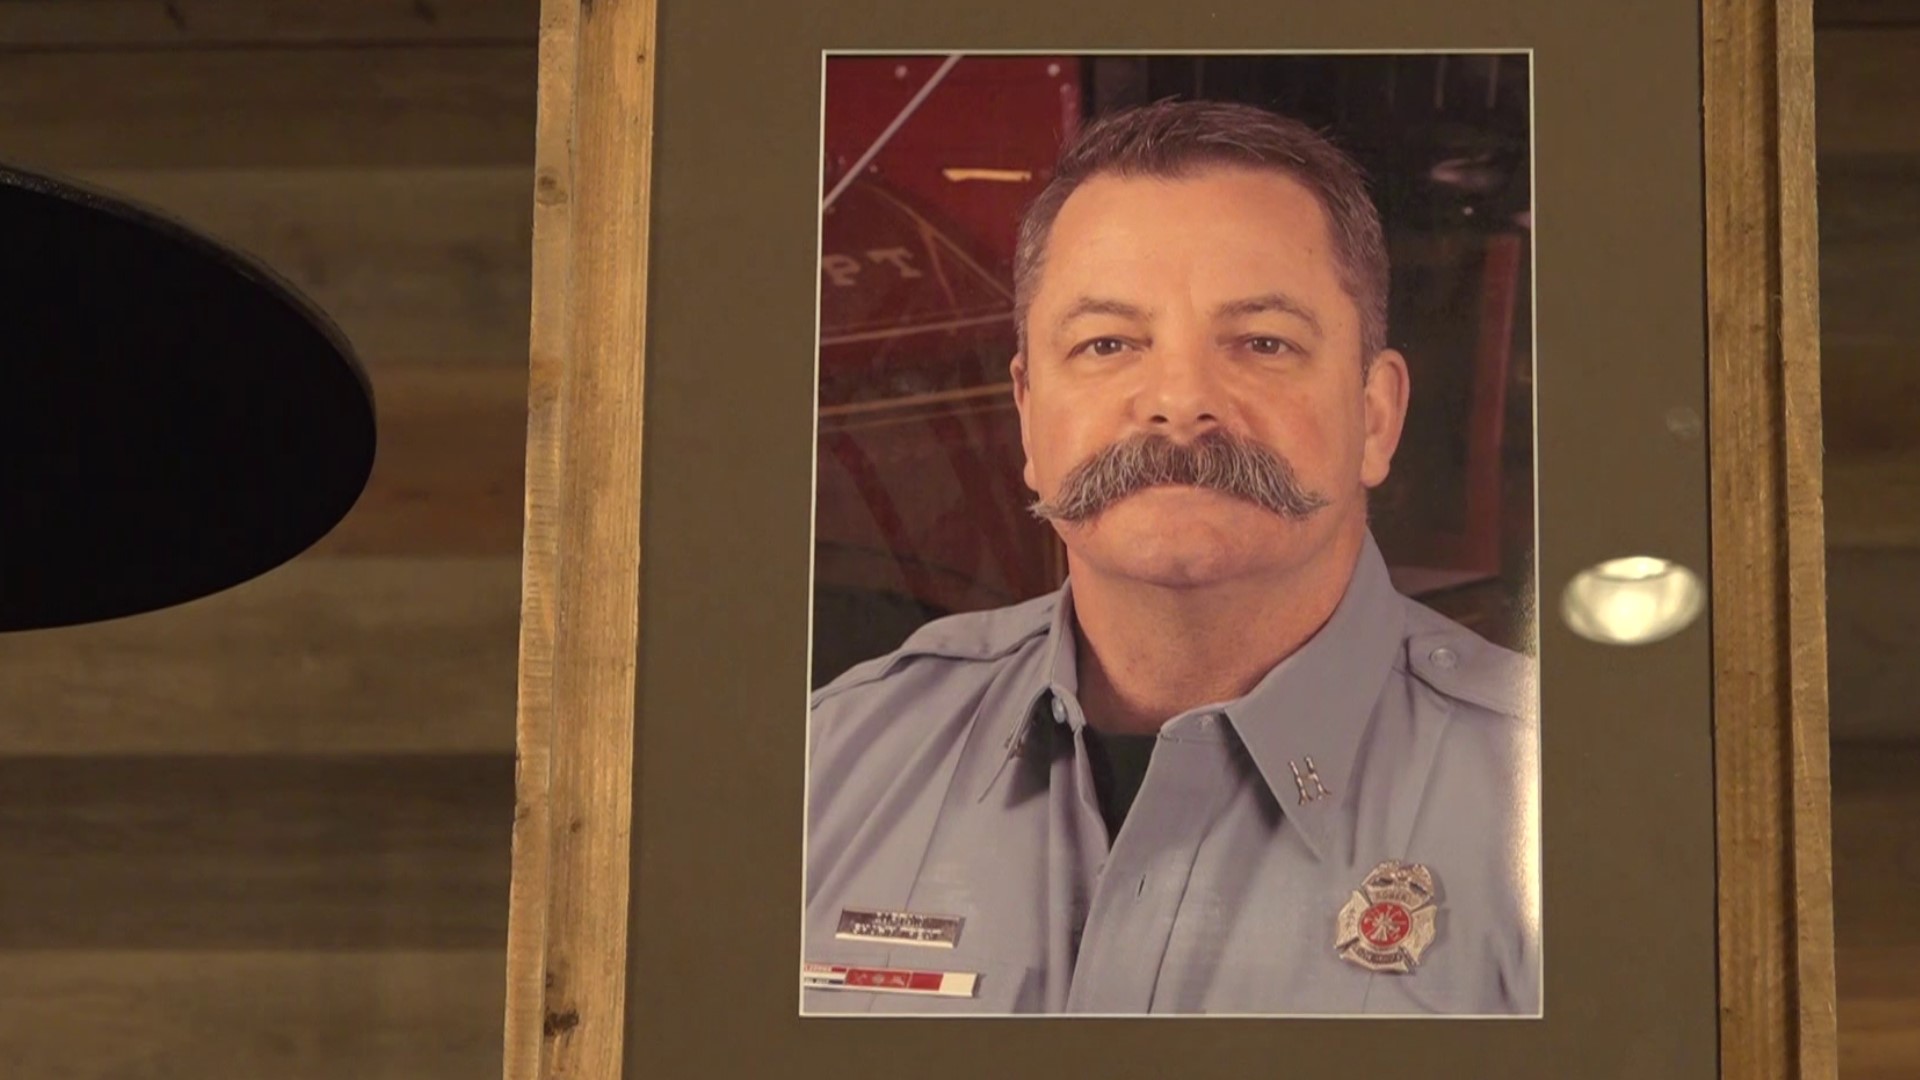 Rogers Fire Captain Shawn Treat was laid to rest after suffering an off-duty medical emergency. Friends and family said goodbye at his funeral.